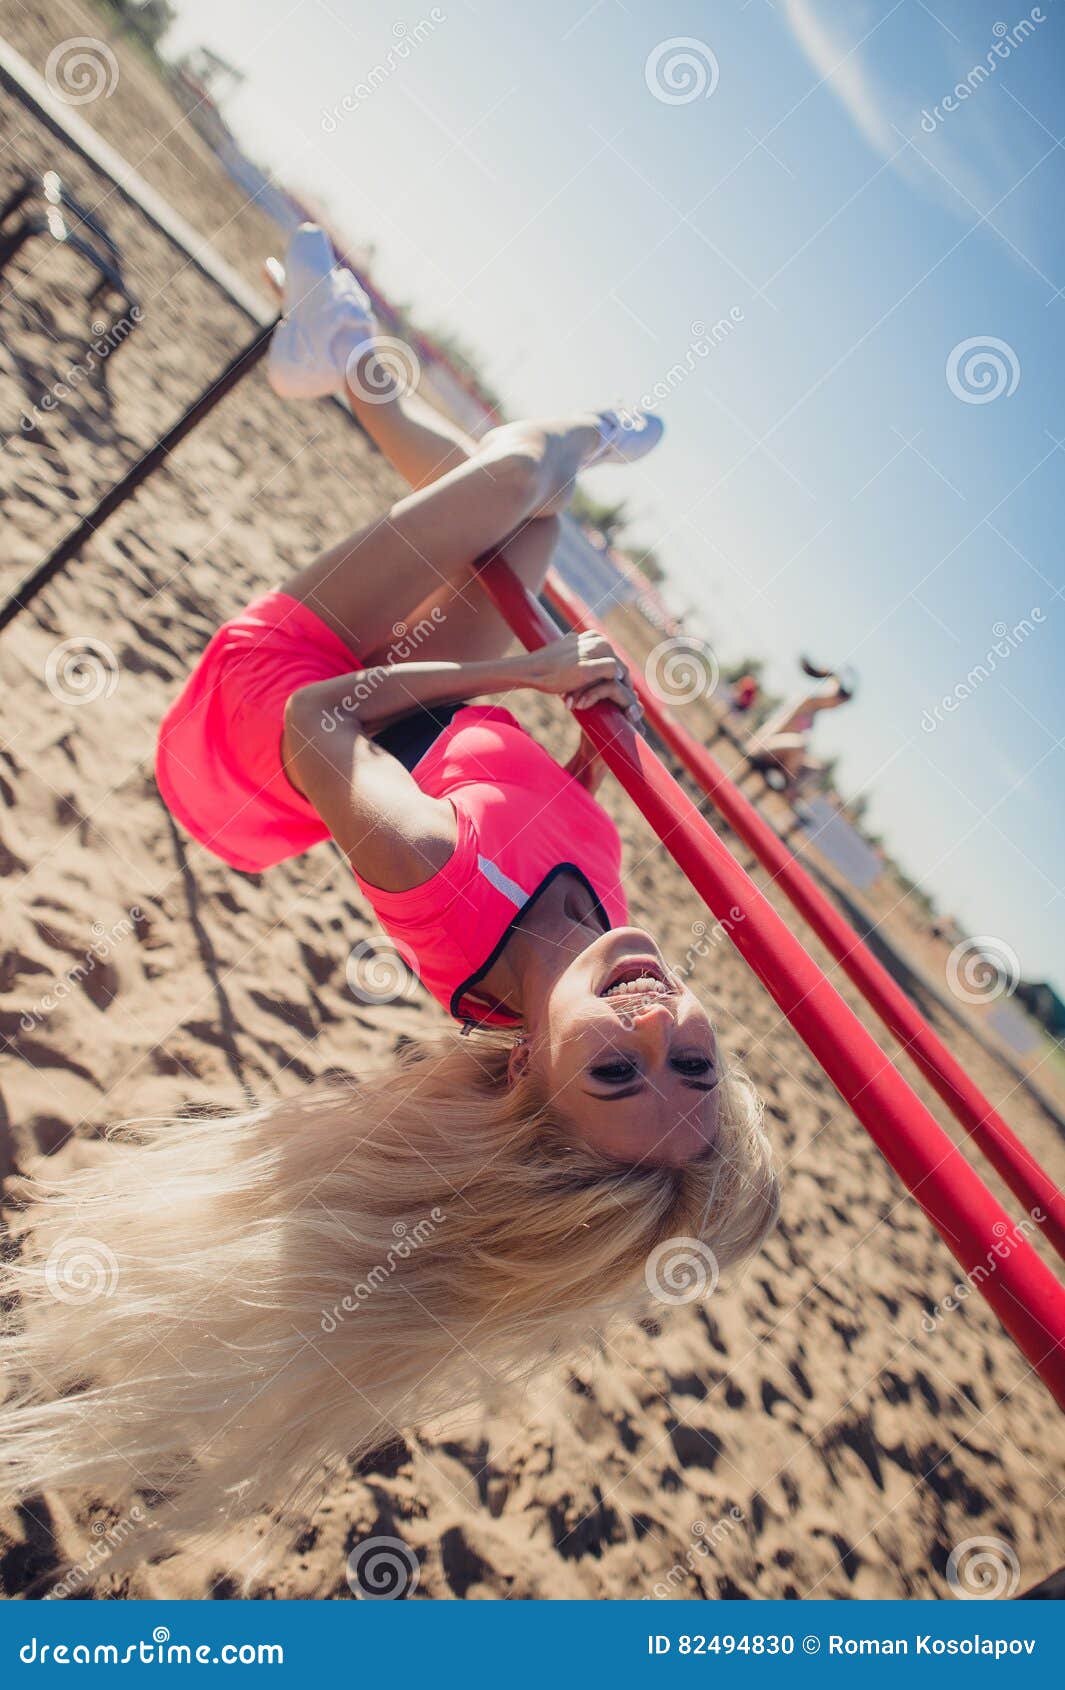 Young woman hanging upside down from pier - Stock Image 